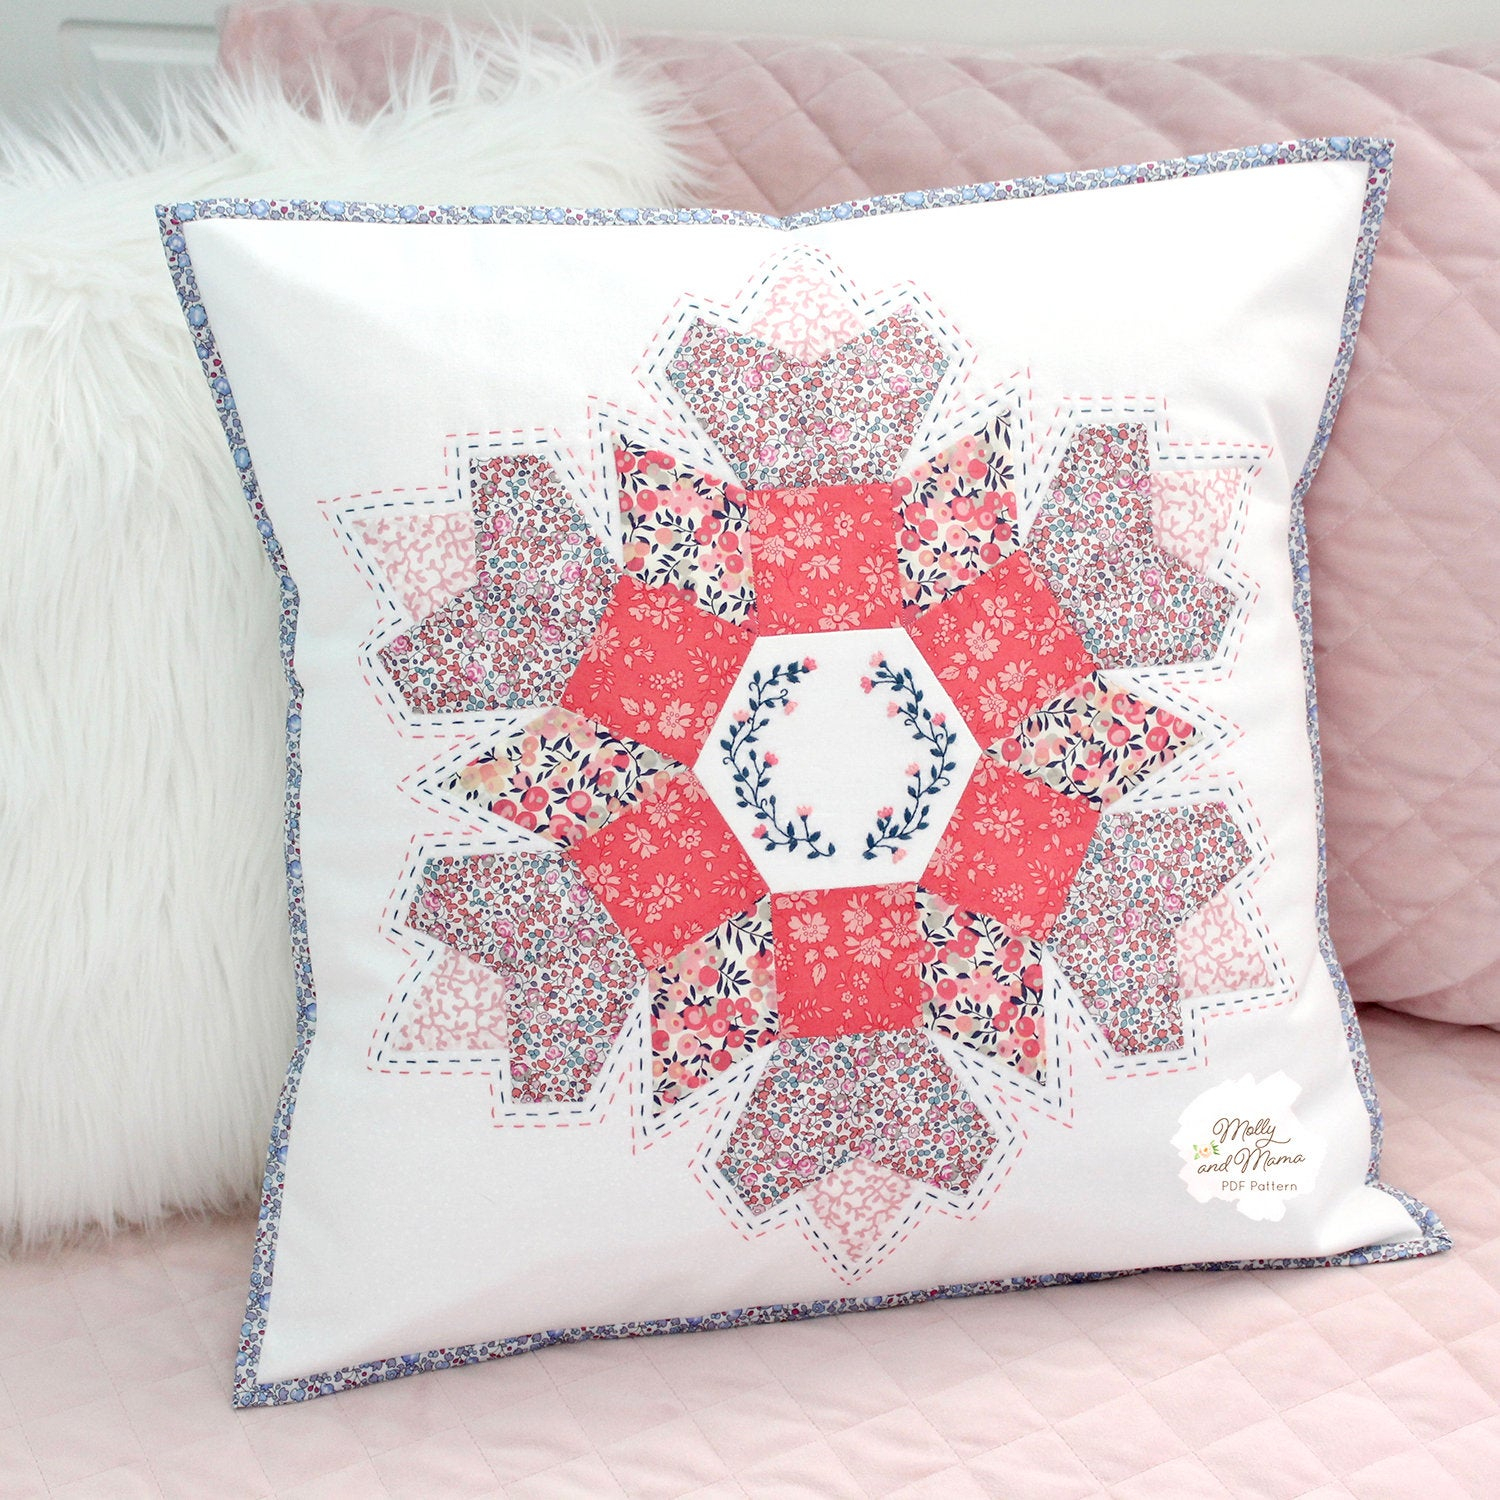 Cushion Cover Embroidery Patterns Stella Cushion Pattern Pdf Download For English Paper Pieced Hand Quilted Cushion Cover Or Pillow Sham With Three Embroidery Options